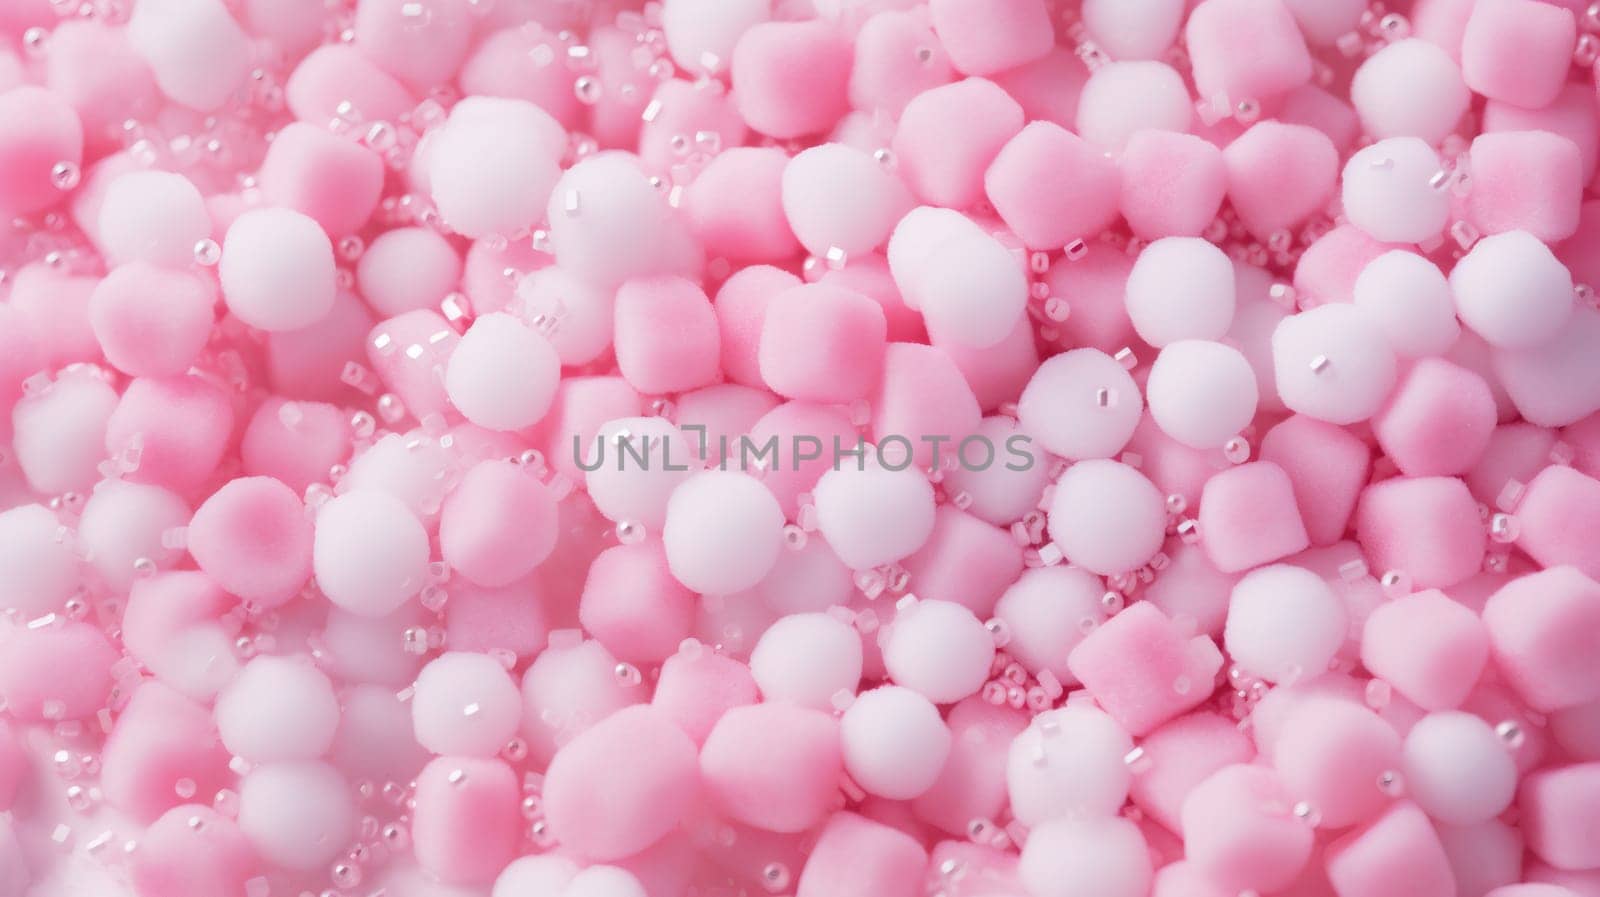 Beautiful background of pink marshmallows with candy sprinkles. by Nataliya